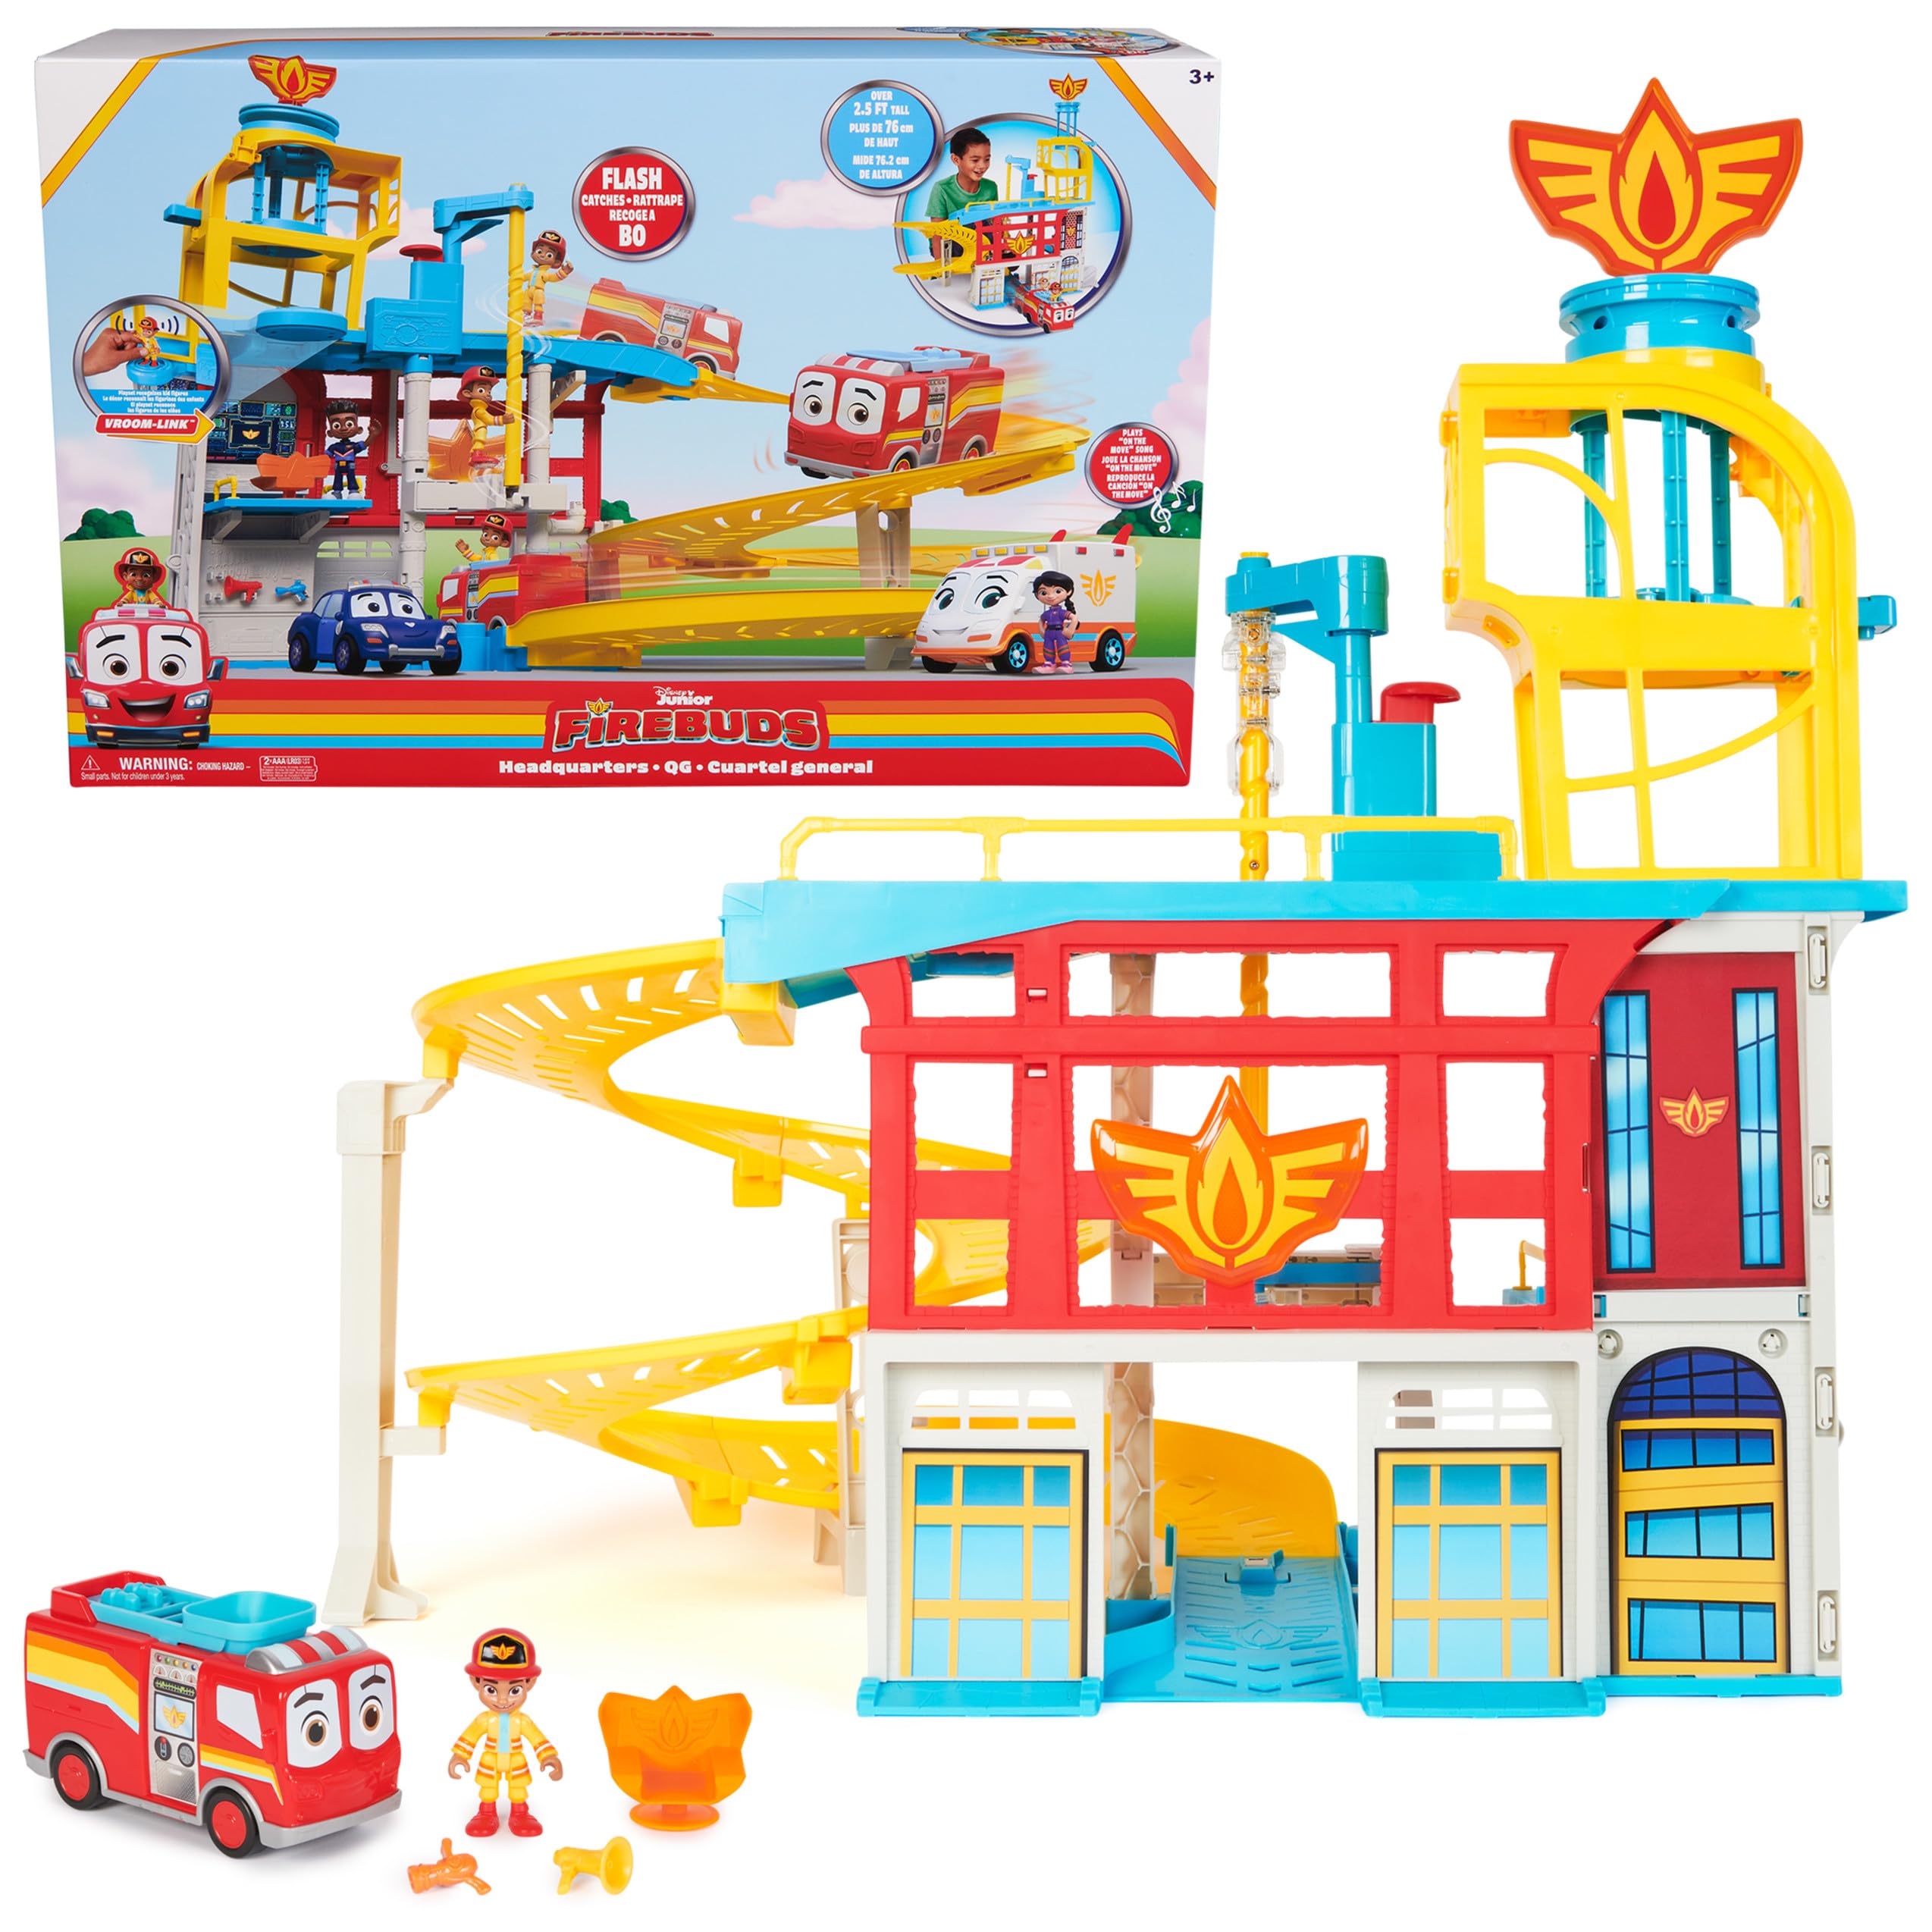 Disney Junior Firebuds HQ Vehicle Launcher Playset w/ Bo Action Figure, Vehicle, 3x Accessories, & Sticker Sheet $25.50 + Free Shipping w/ Prime or on $35+